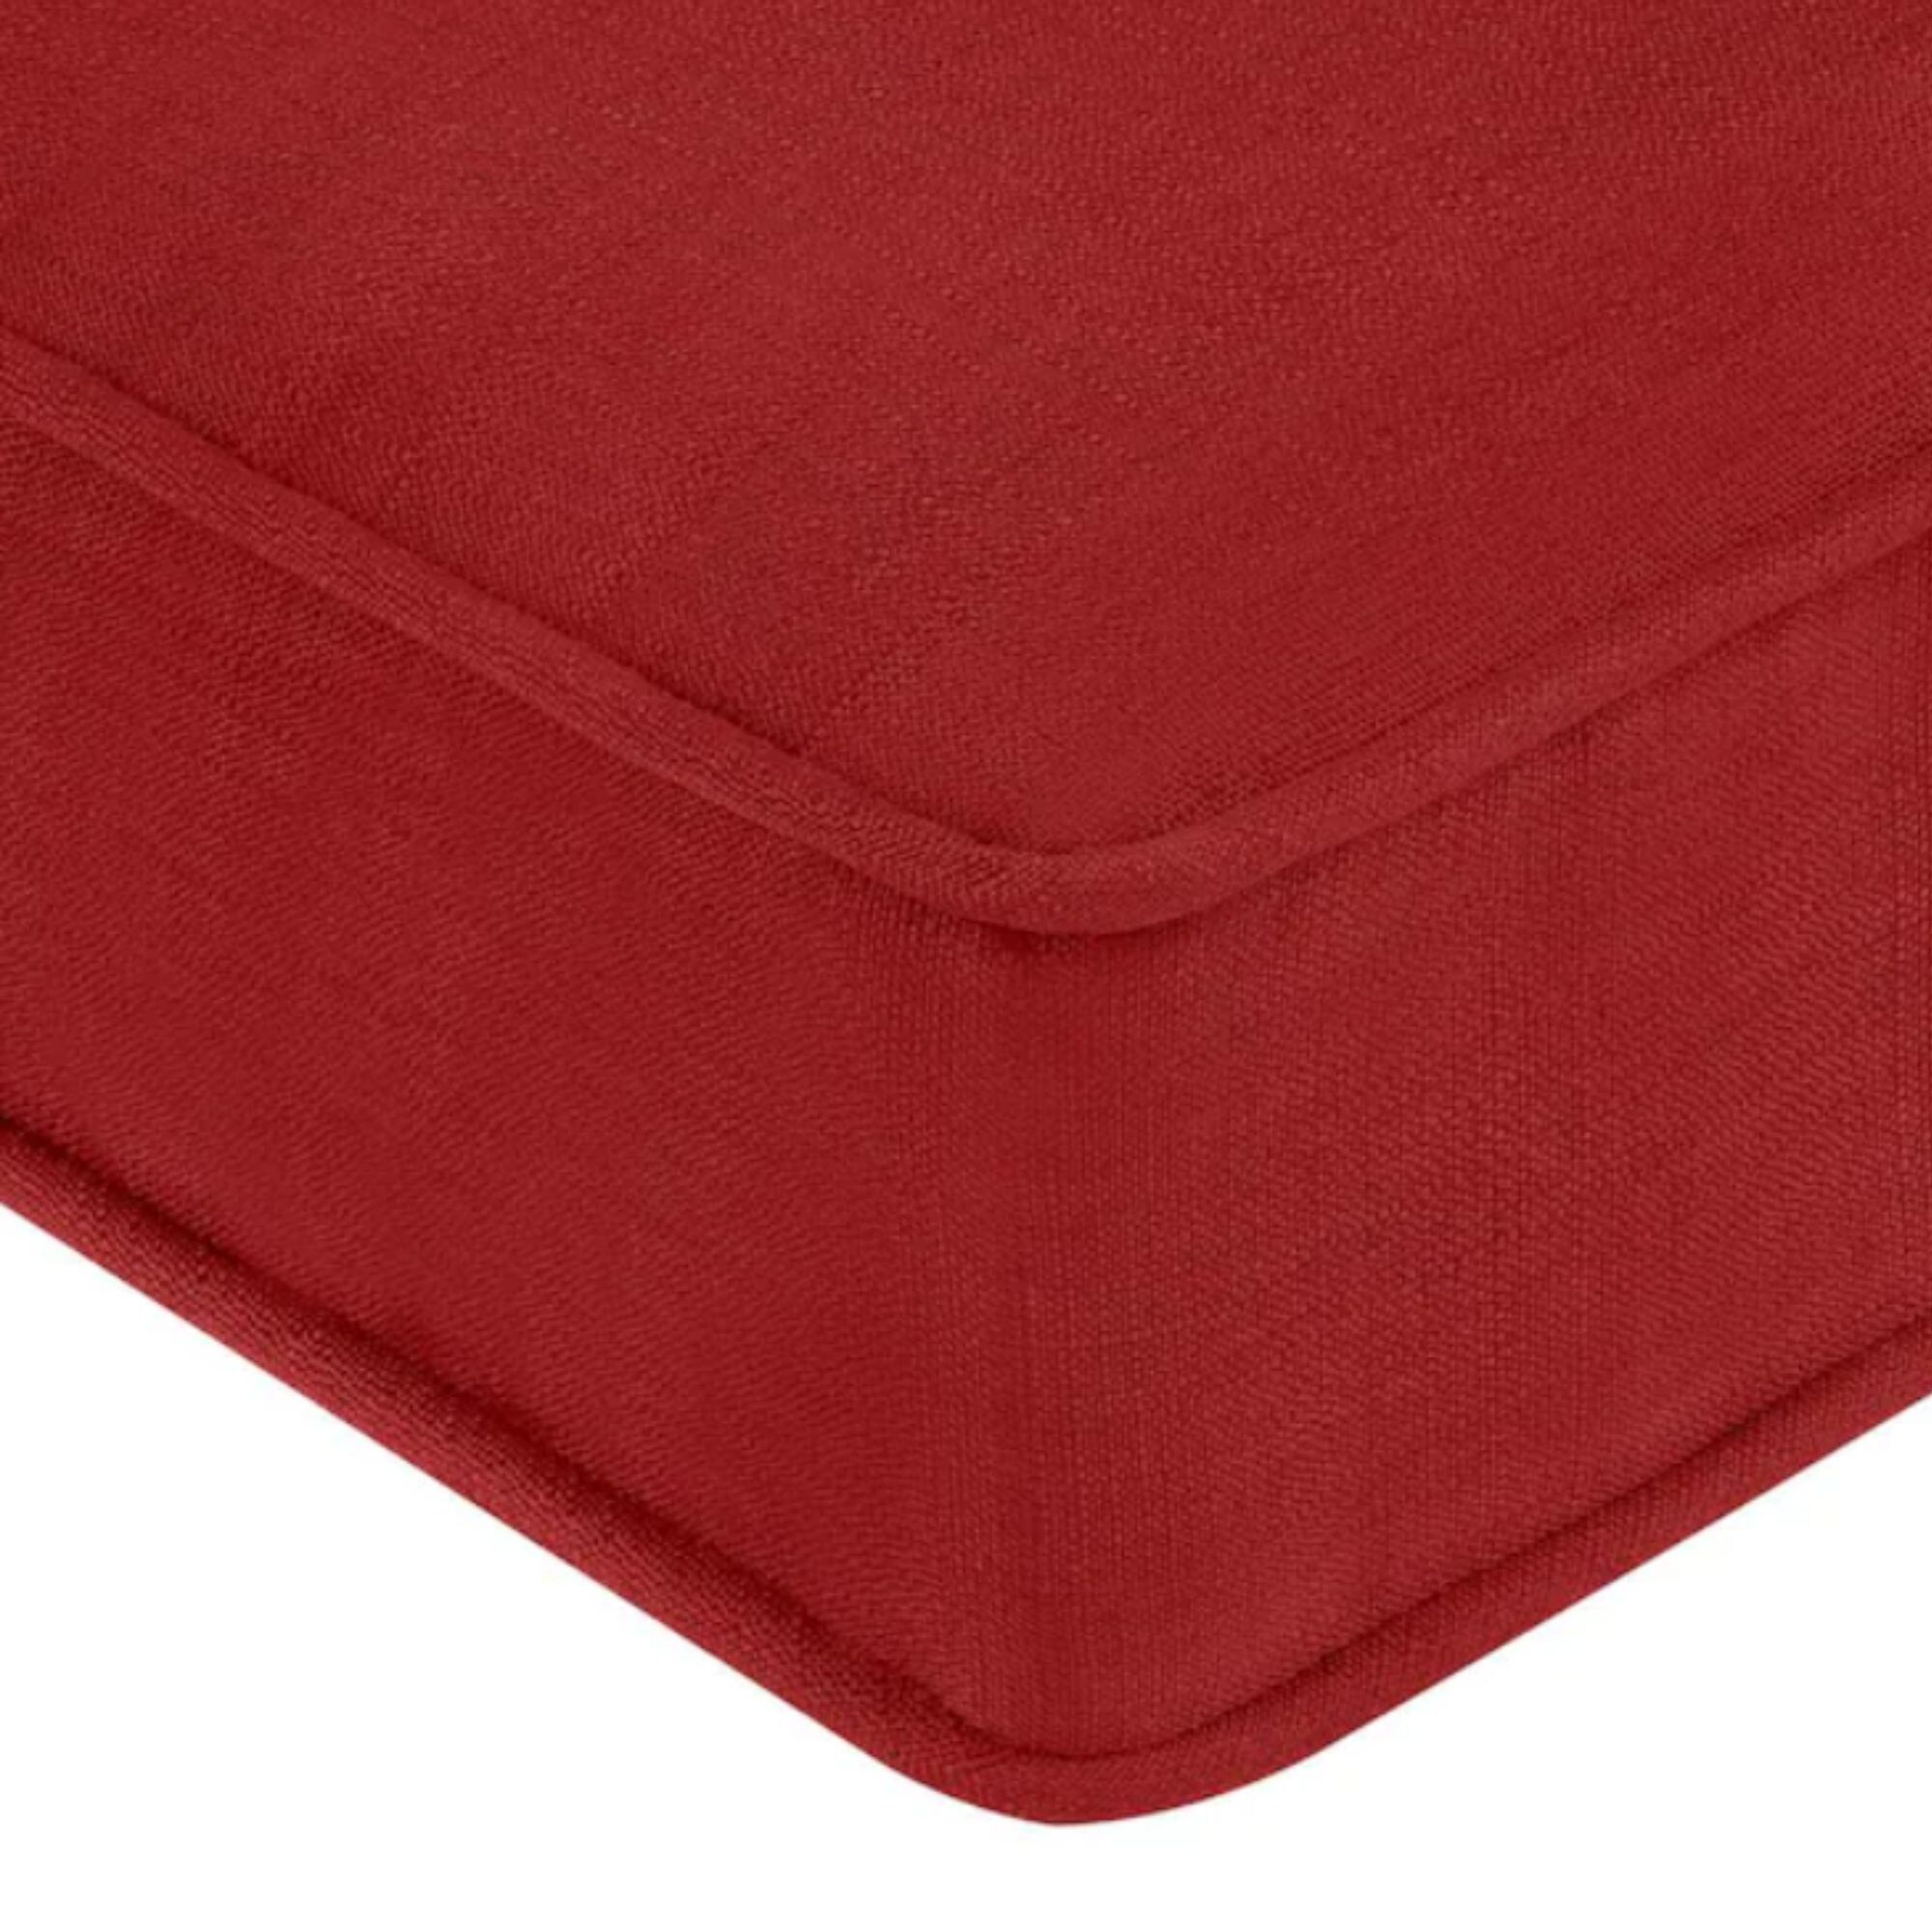 https://ak1.ostkcdn.com/images/products/is/images/direct/9995f626b06b6236690f7be253d05cd83b25fab4/Haven-Way-Universal-Outdoor-Deep-Seat-Lounge-Chair-Cushion-Set.jpg